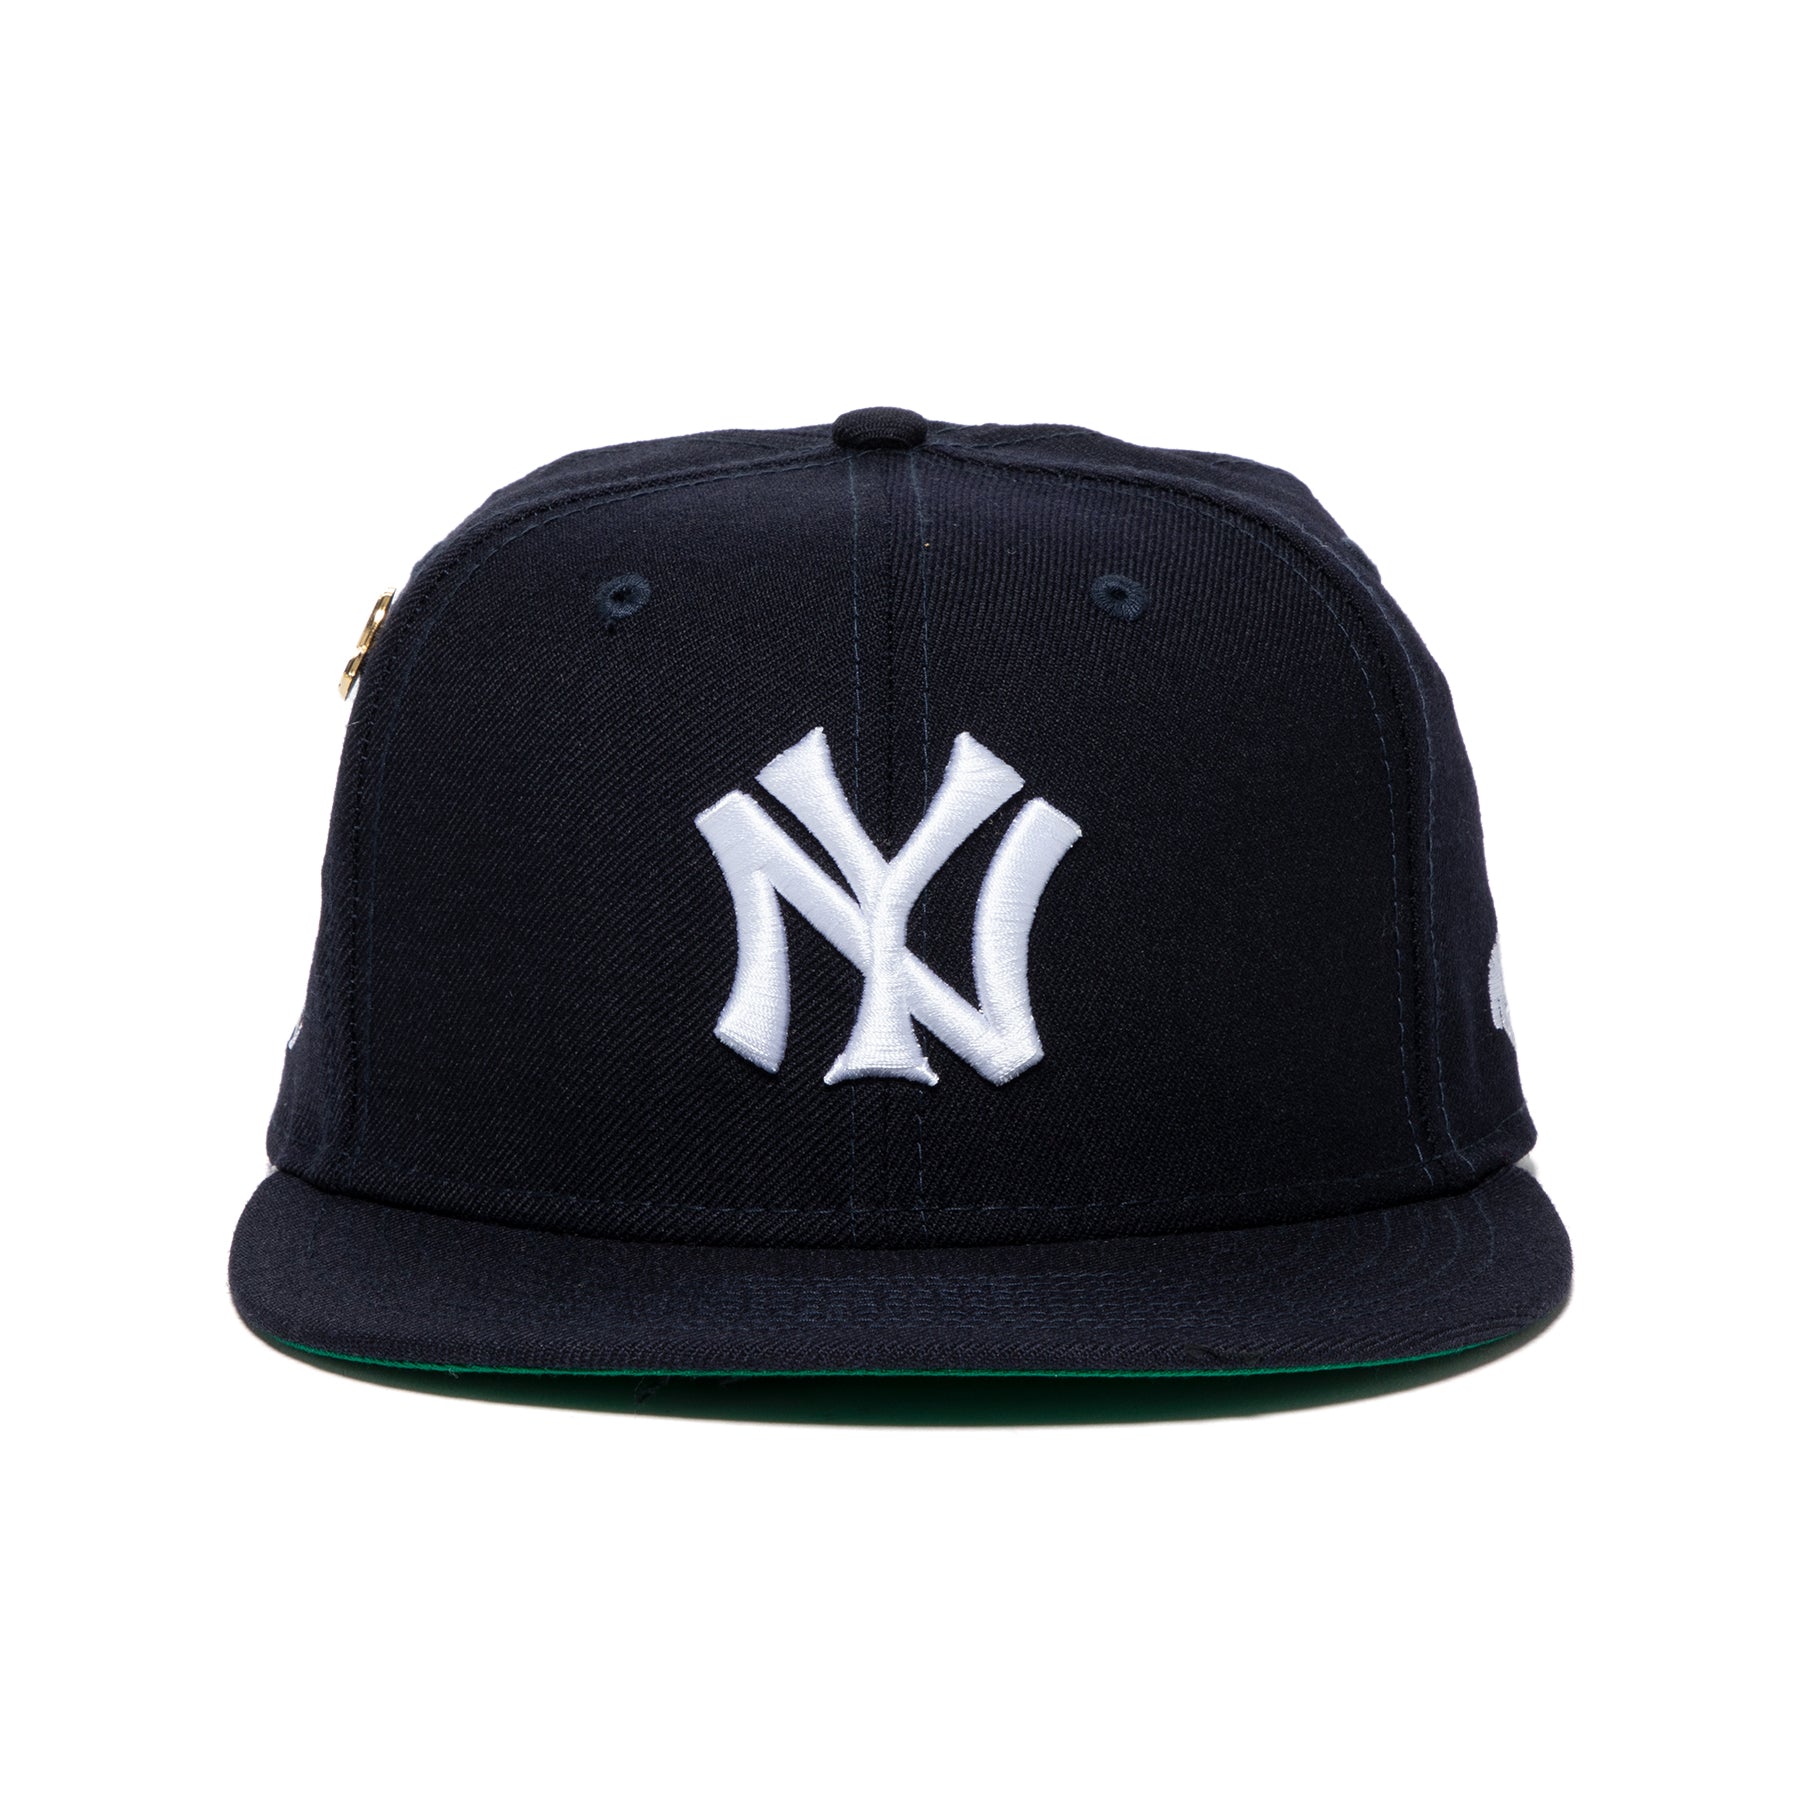 New Era New York Yankees 59FIFTY Fitted Hat - Navy, Size 8 by Sneaker Politics